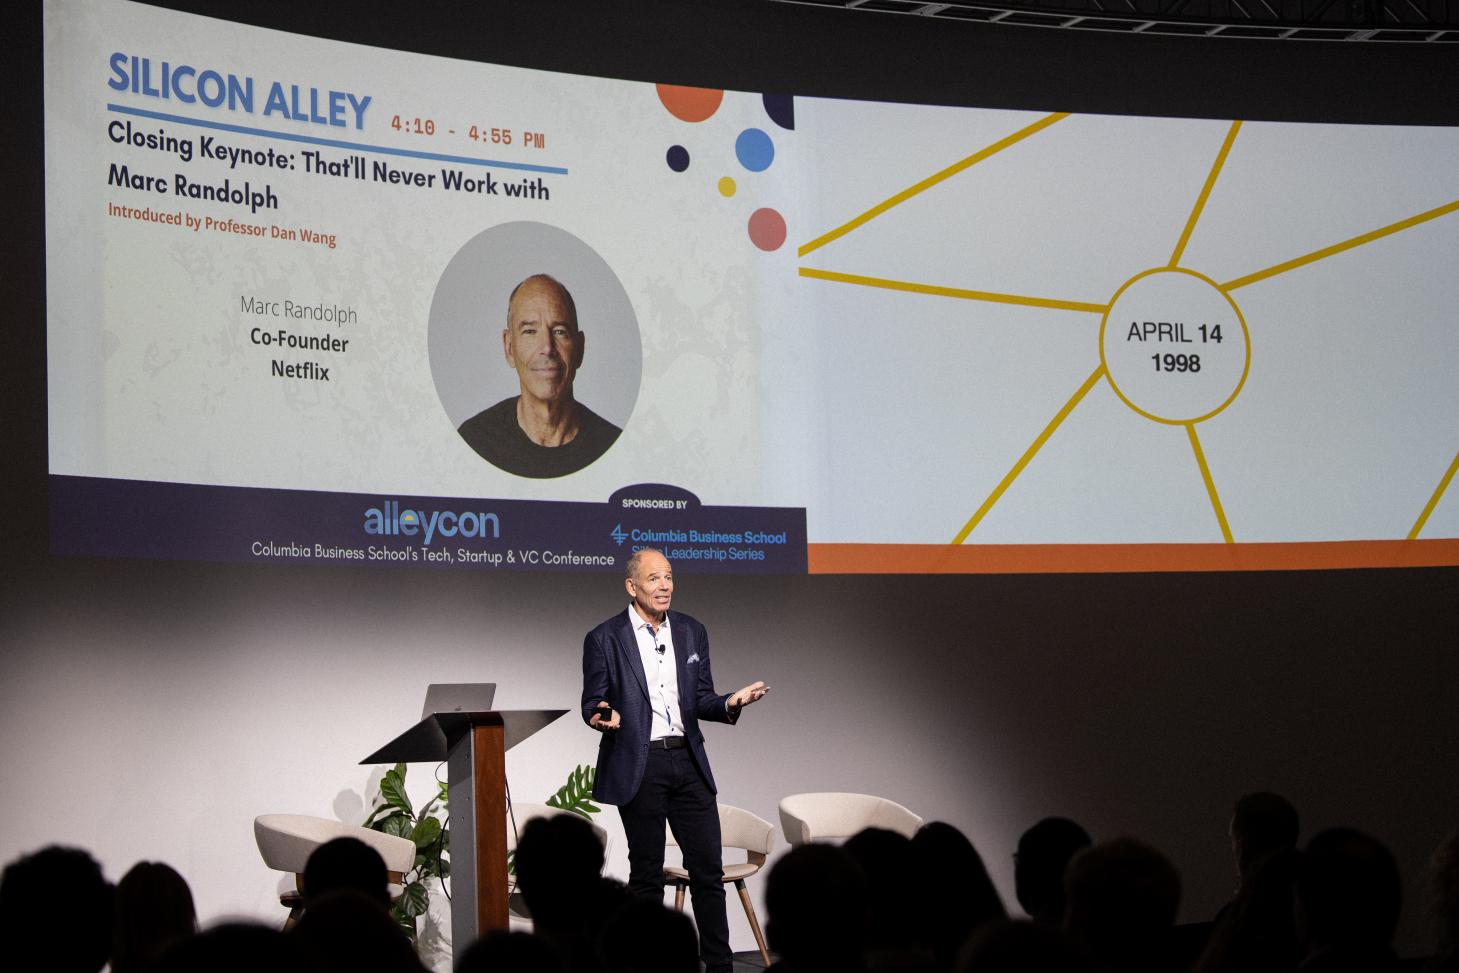 Marc Randolph, co-founder of Netflix, speaking on stage at the Alleycon conference.